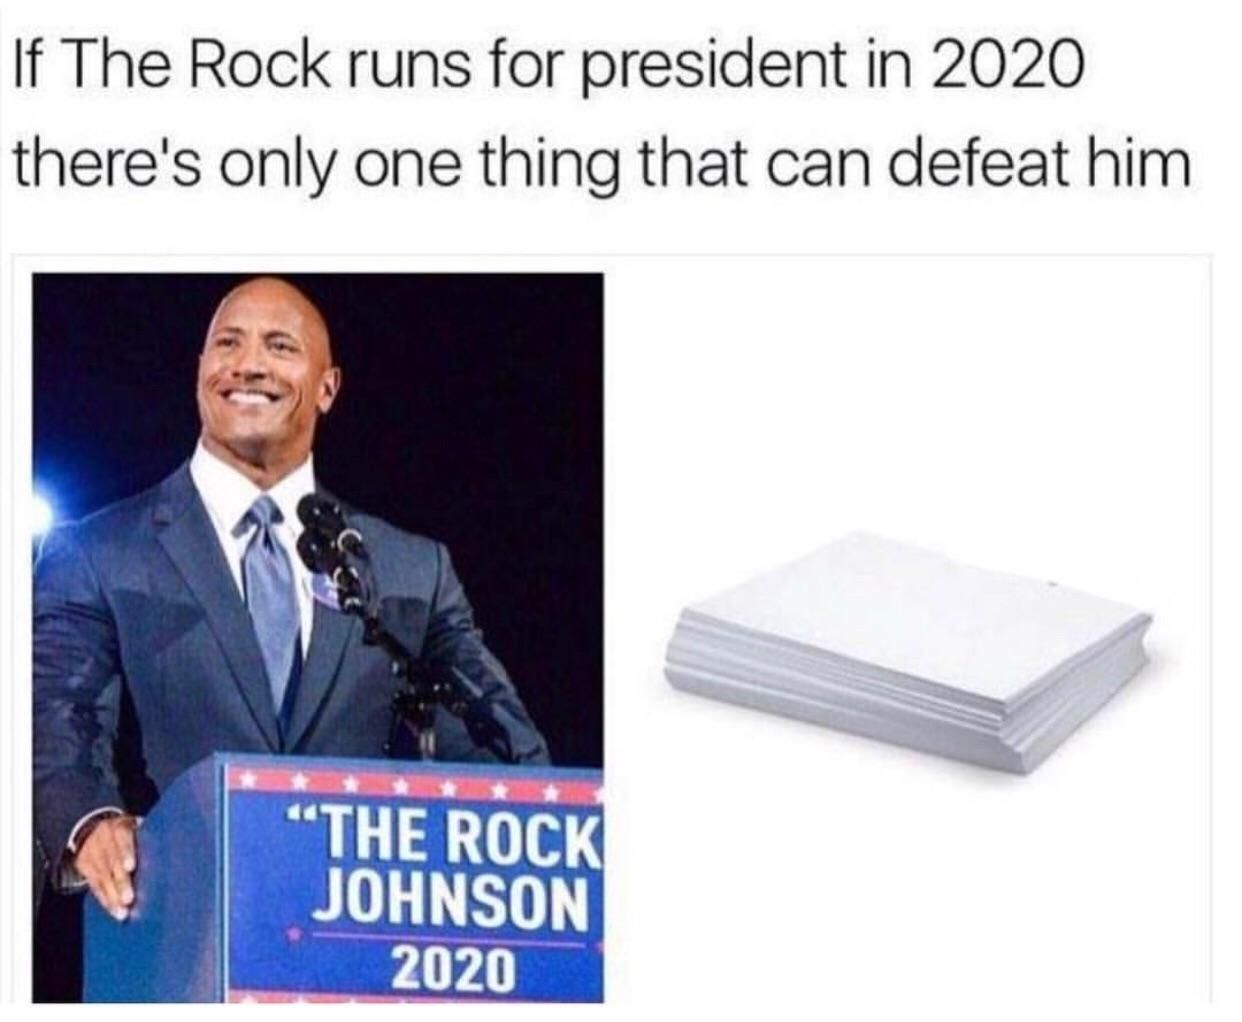 What is The Rock’s ONLY weakness?